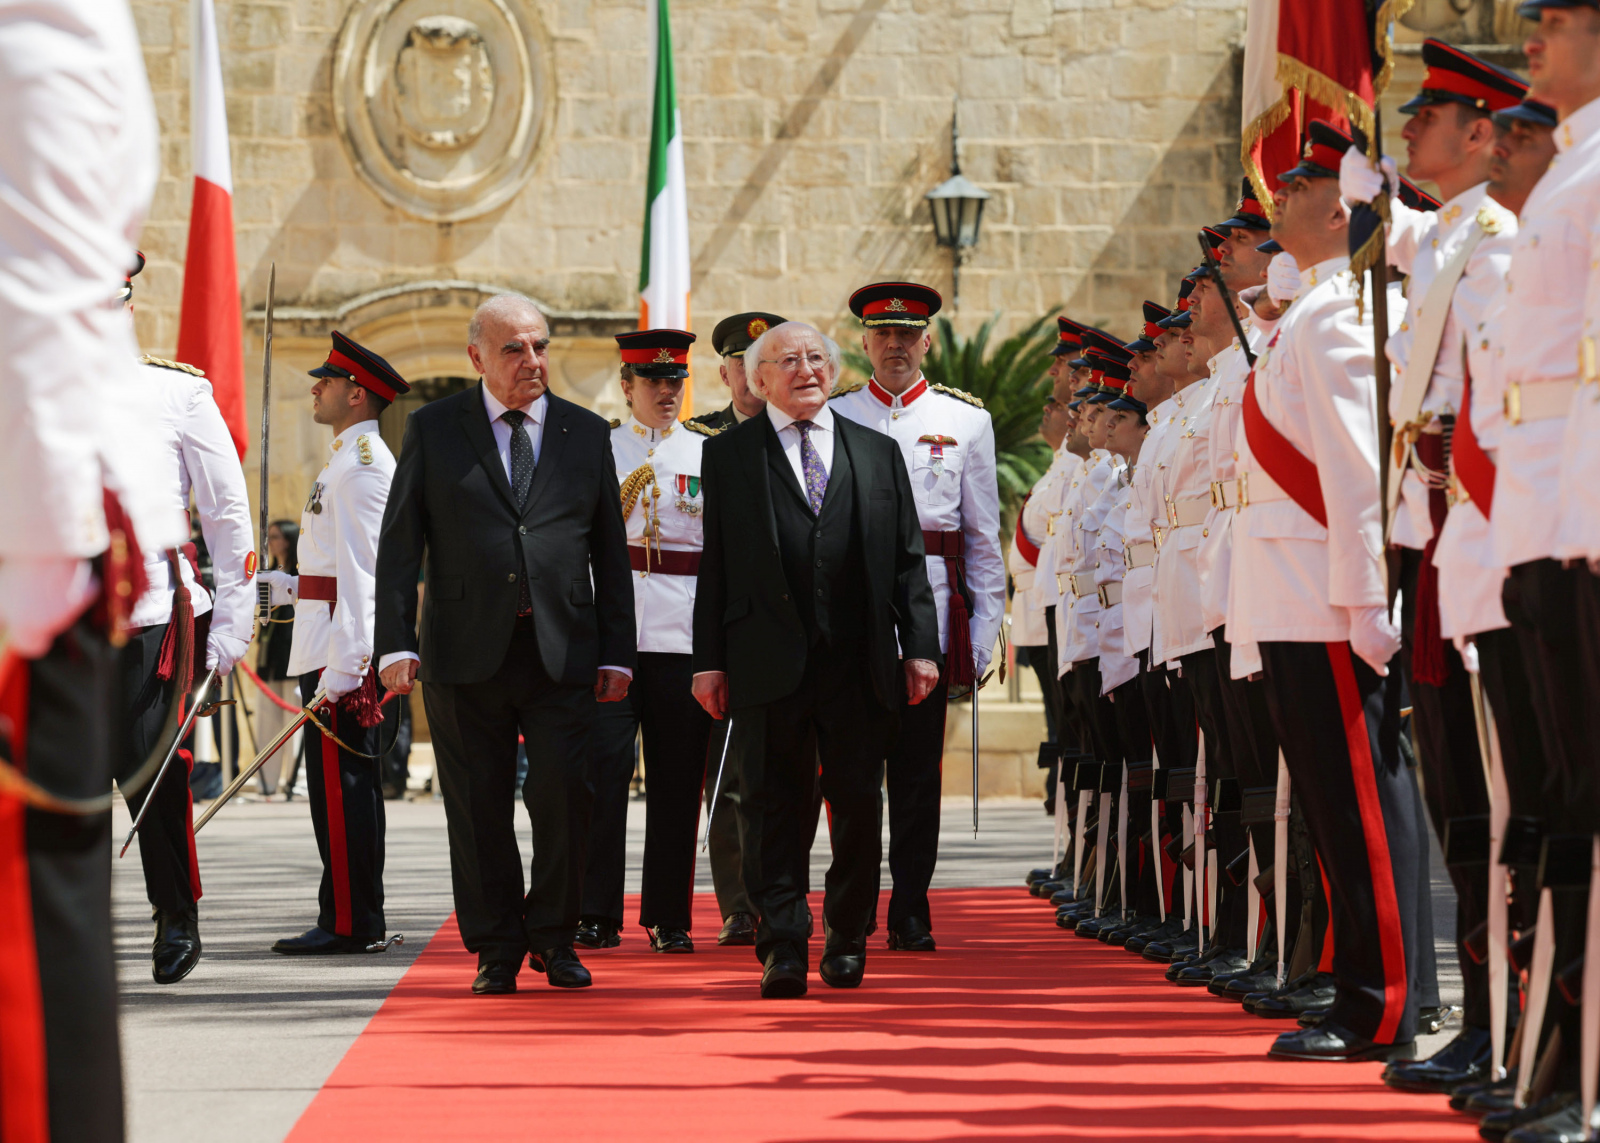 State Visit to the Republic of Malta